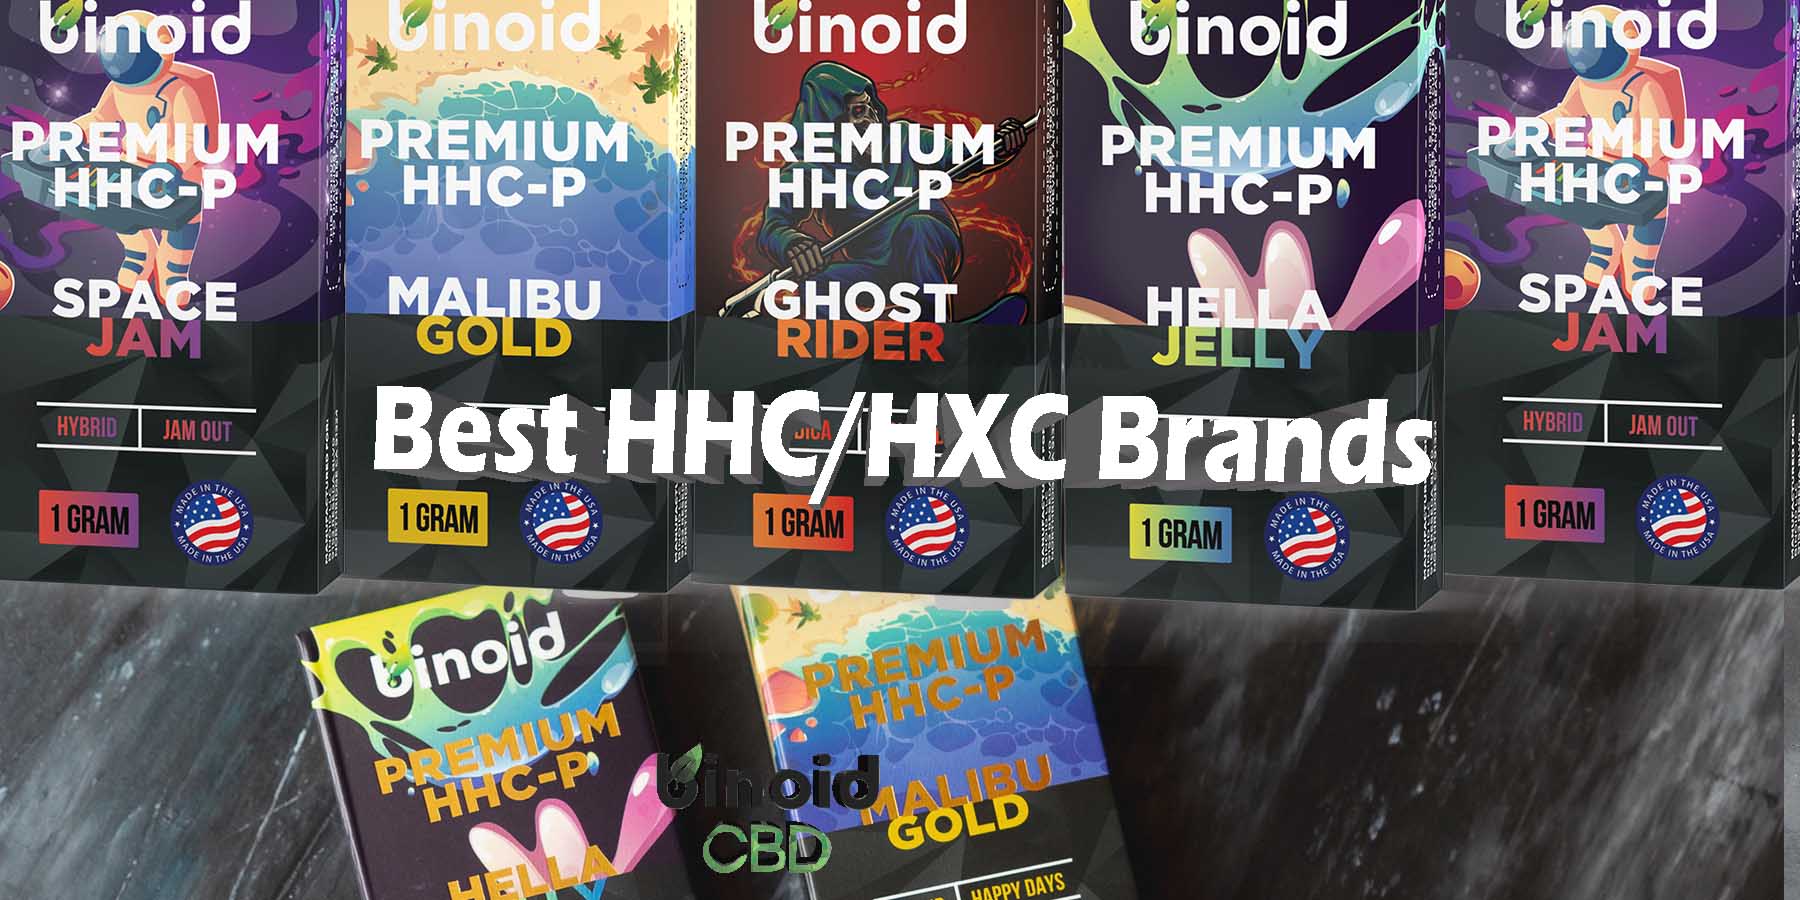 Best HHC HCX Disposable Vape 2 Gram Review Gram Review Take Work Online Best Brand Price Get Near Me Lowest Coupon Discount Store Shop Vapes Carts Online Strong